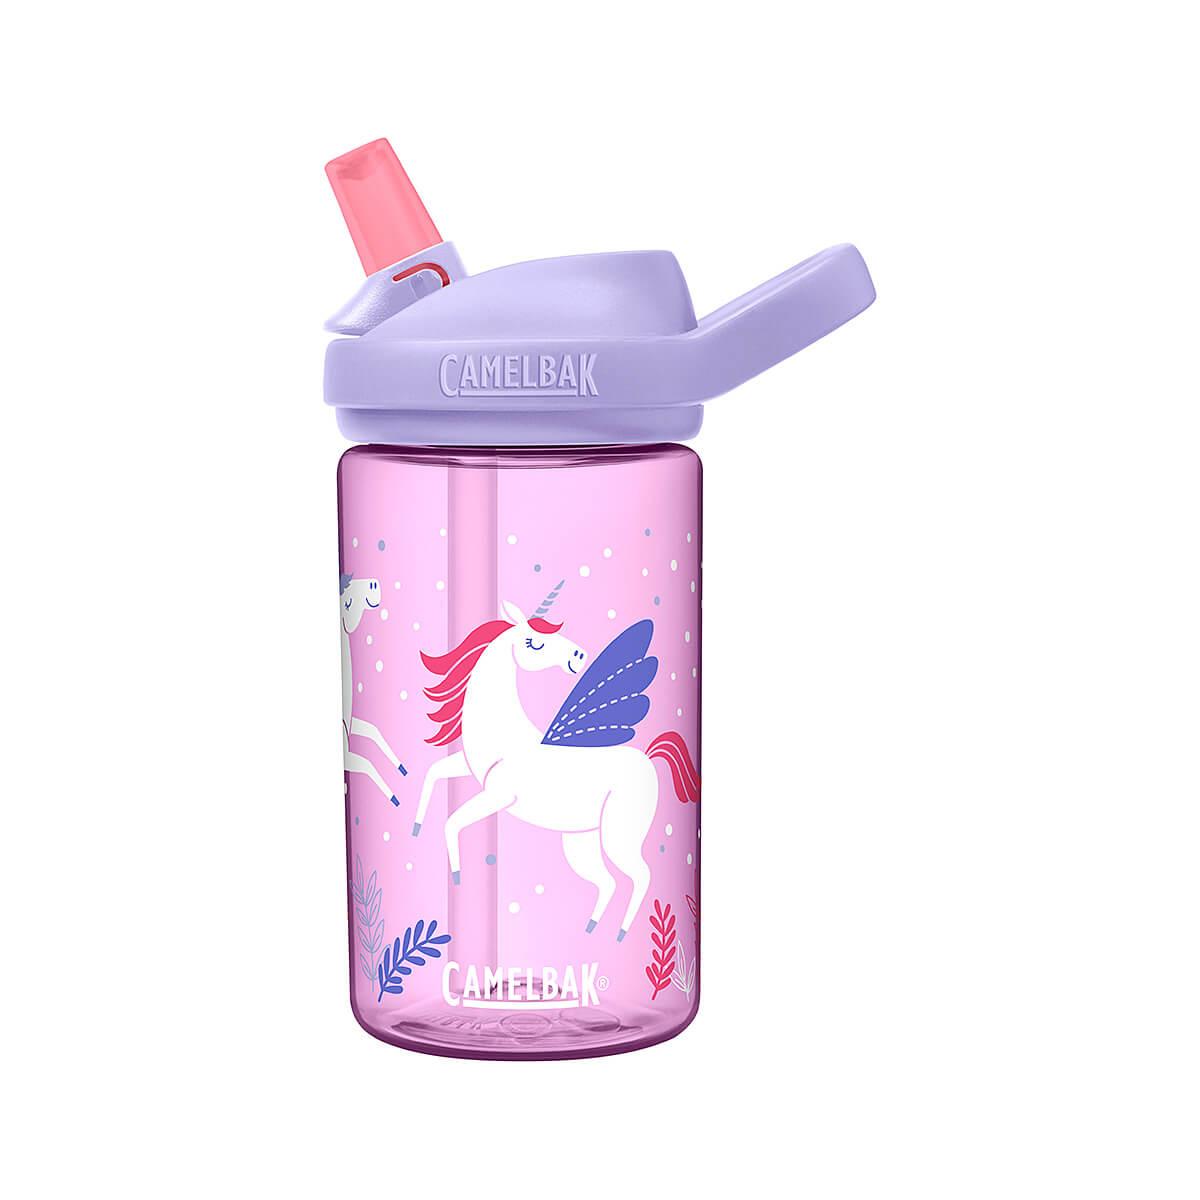  Kids ' Eddy + Water Bottle With Tritan Renew Limited Edition - 14 Ounce